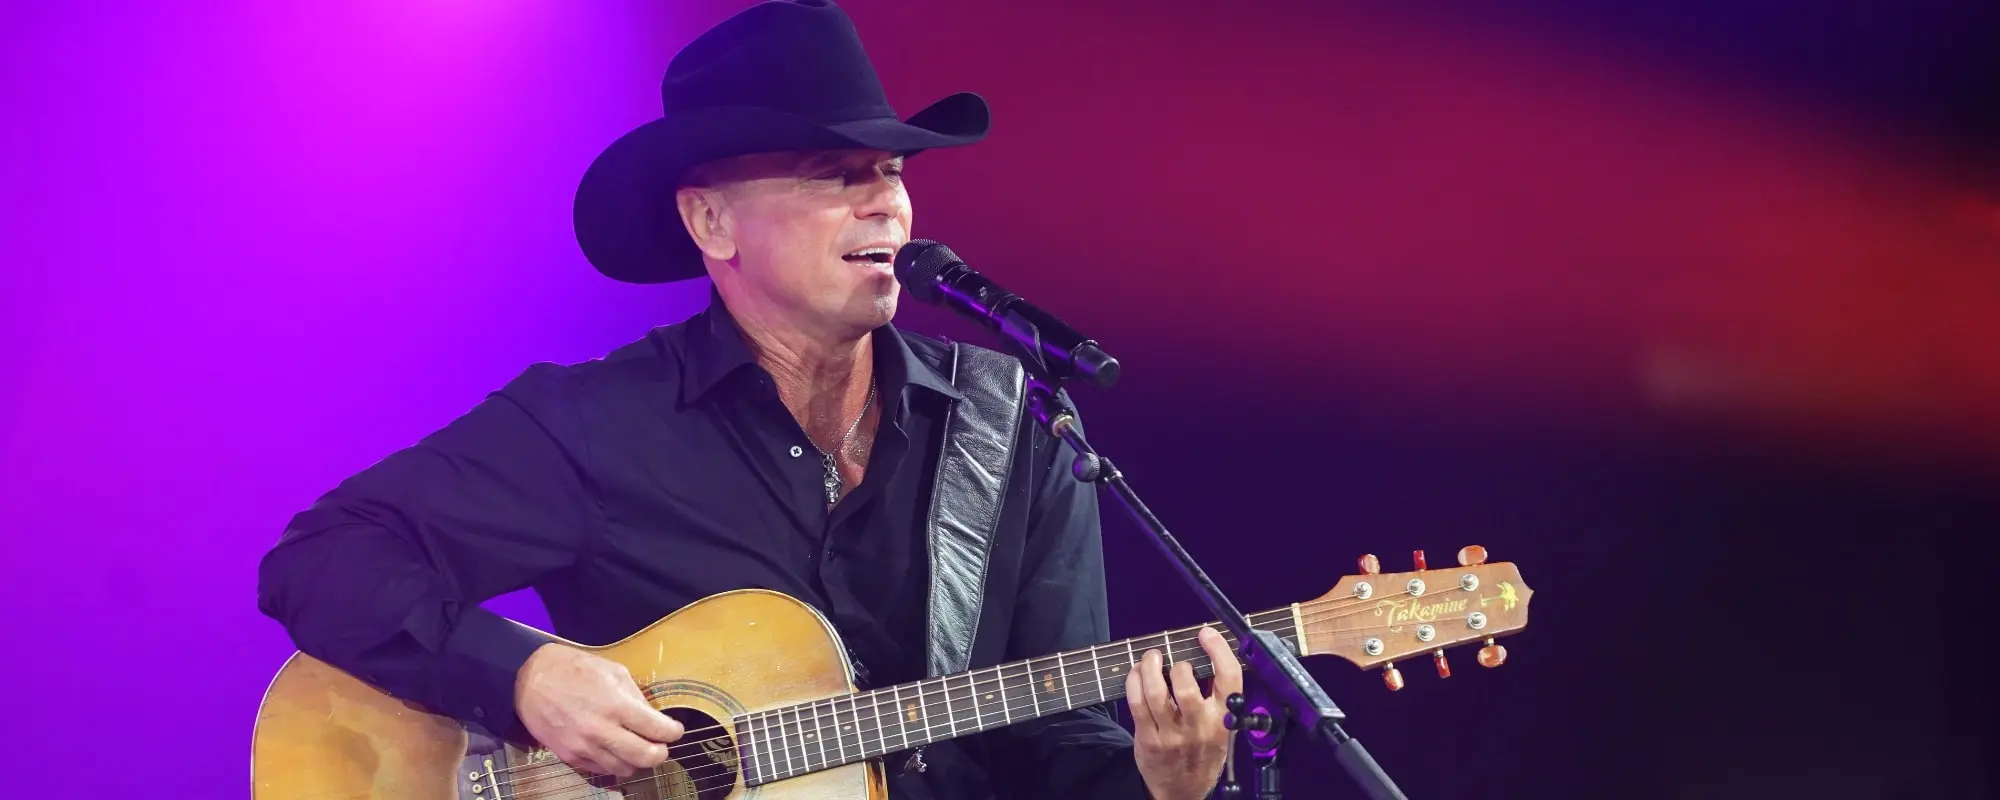 Kenny Chesney’s Sun Goes Down Tour: Setlist, Tickets, and More